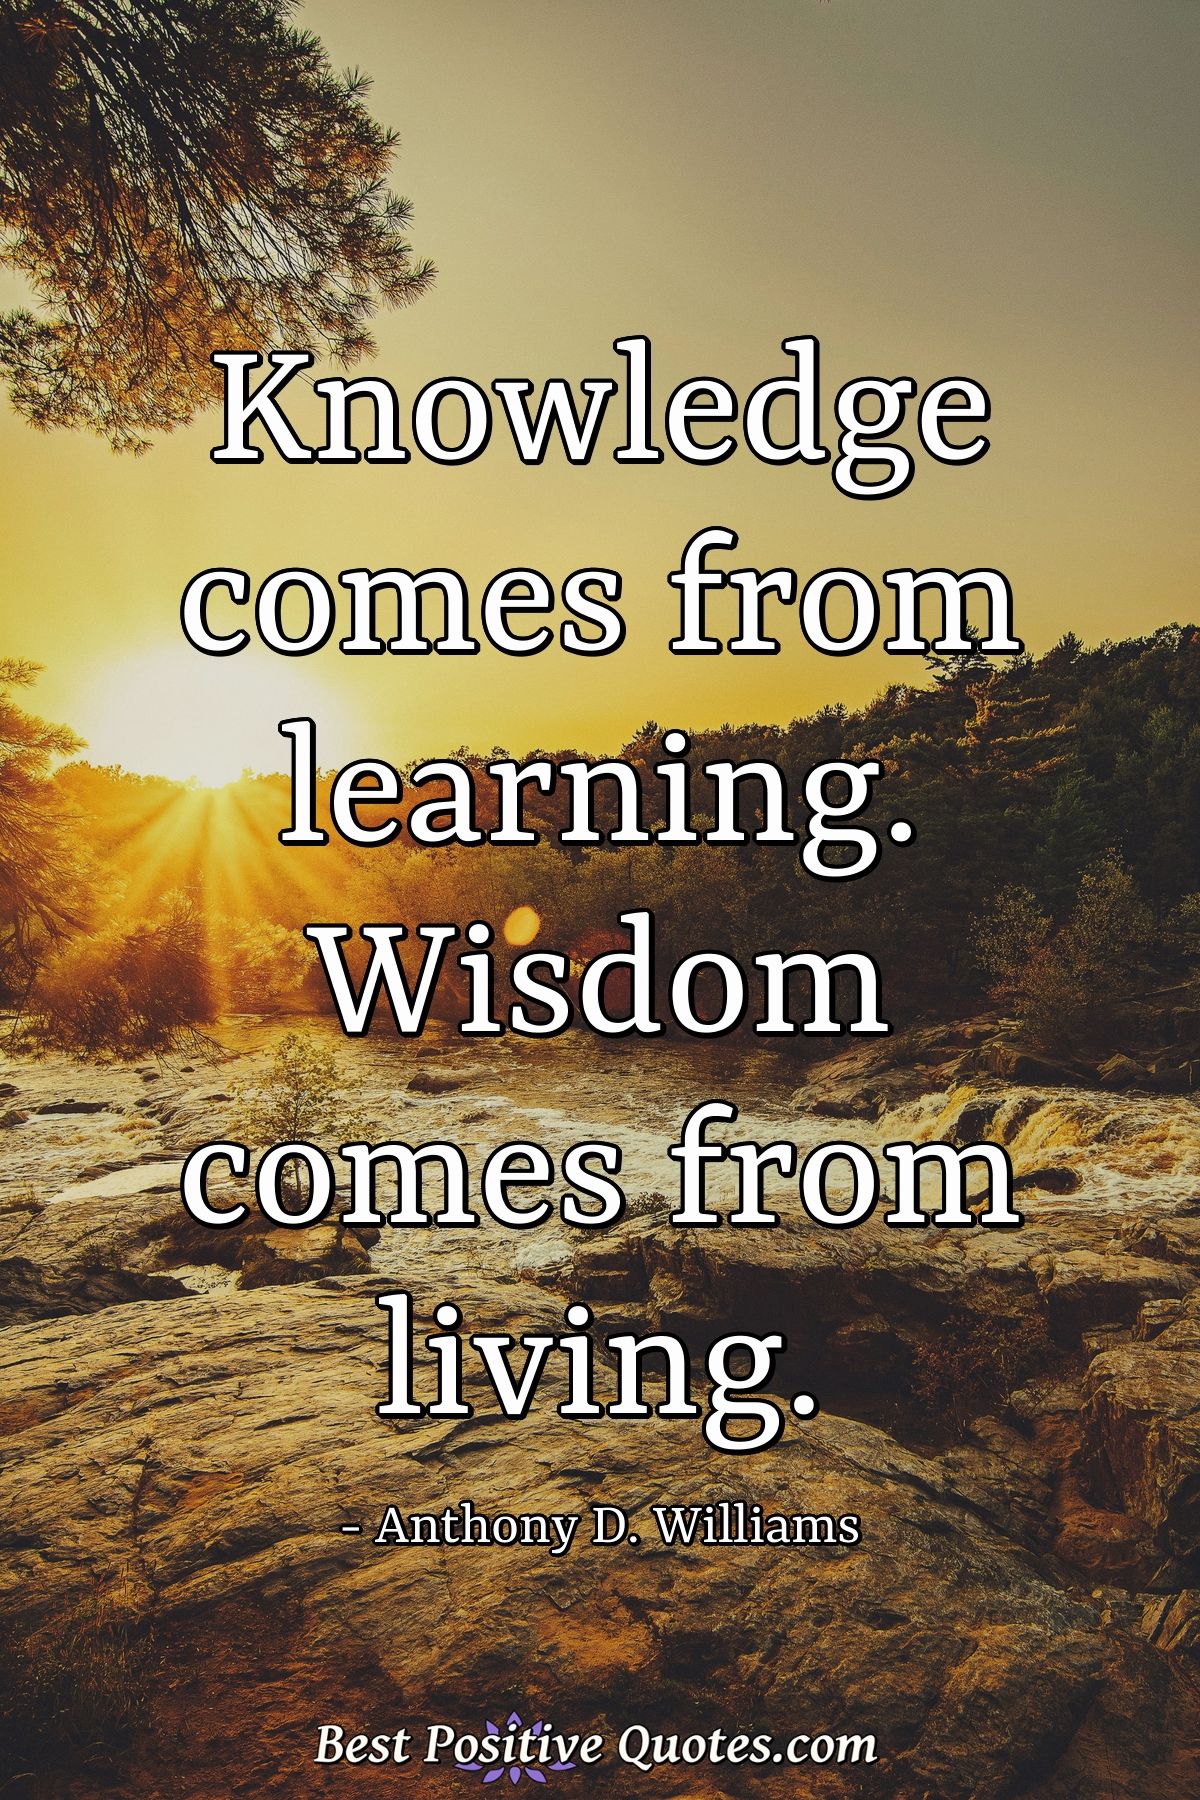 Knowledge comes from learning. Wisdom comes from living. - Anthony D. Williams